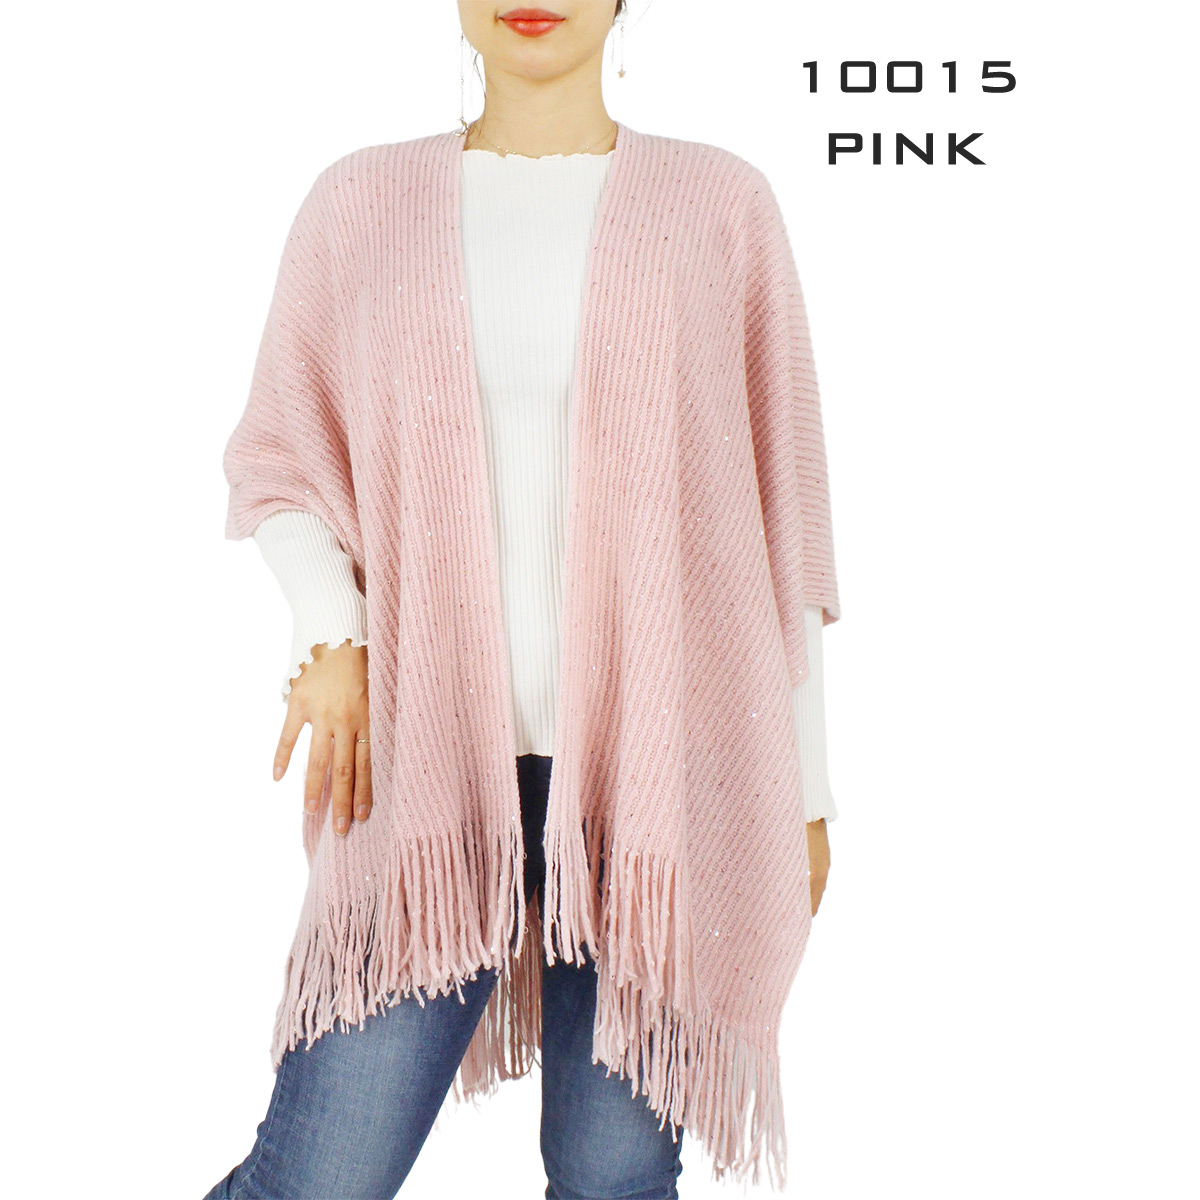 10015 PINK Sequined Knit Ruana 